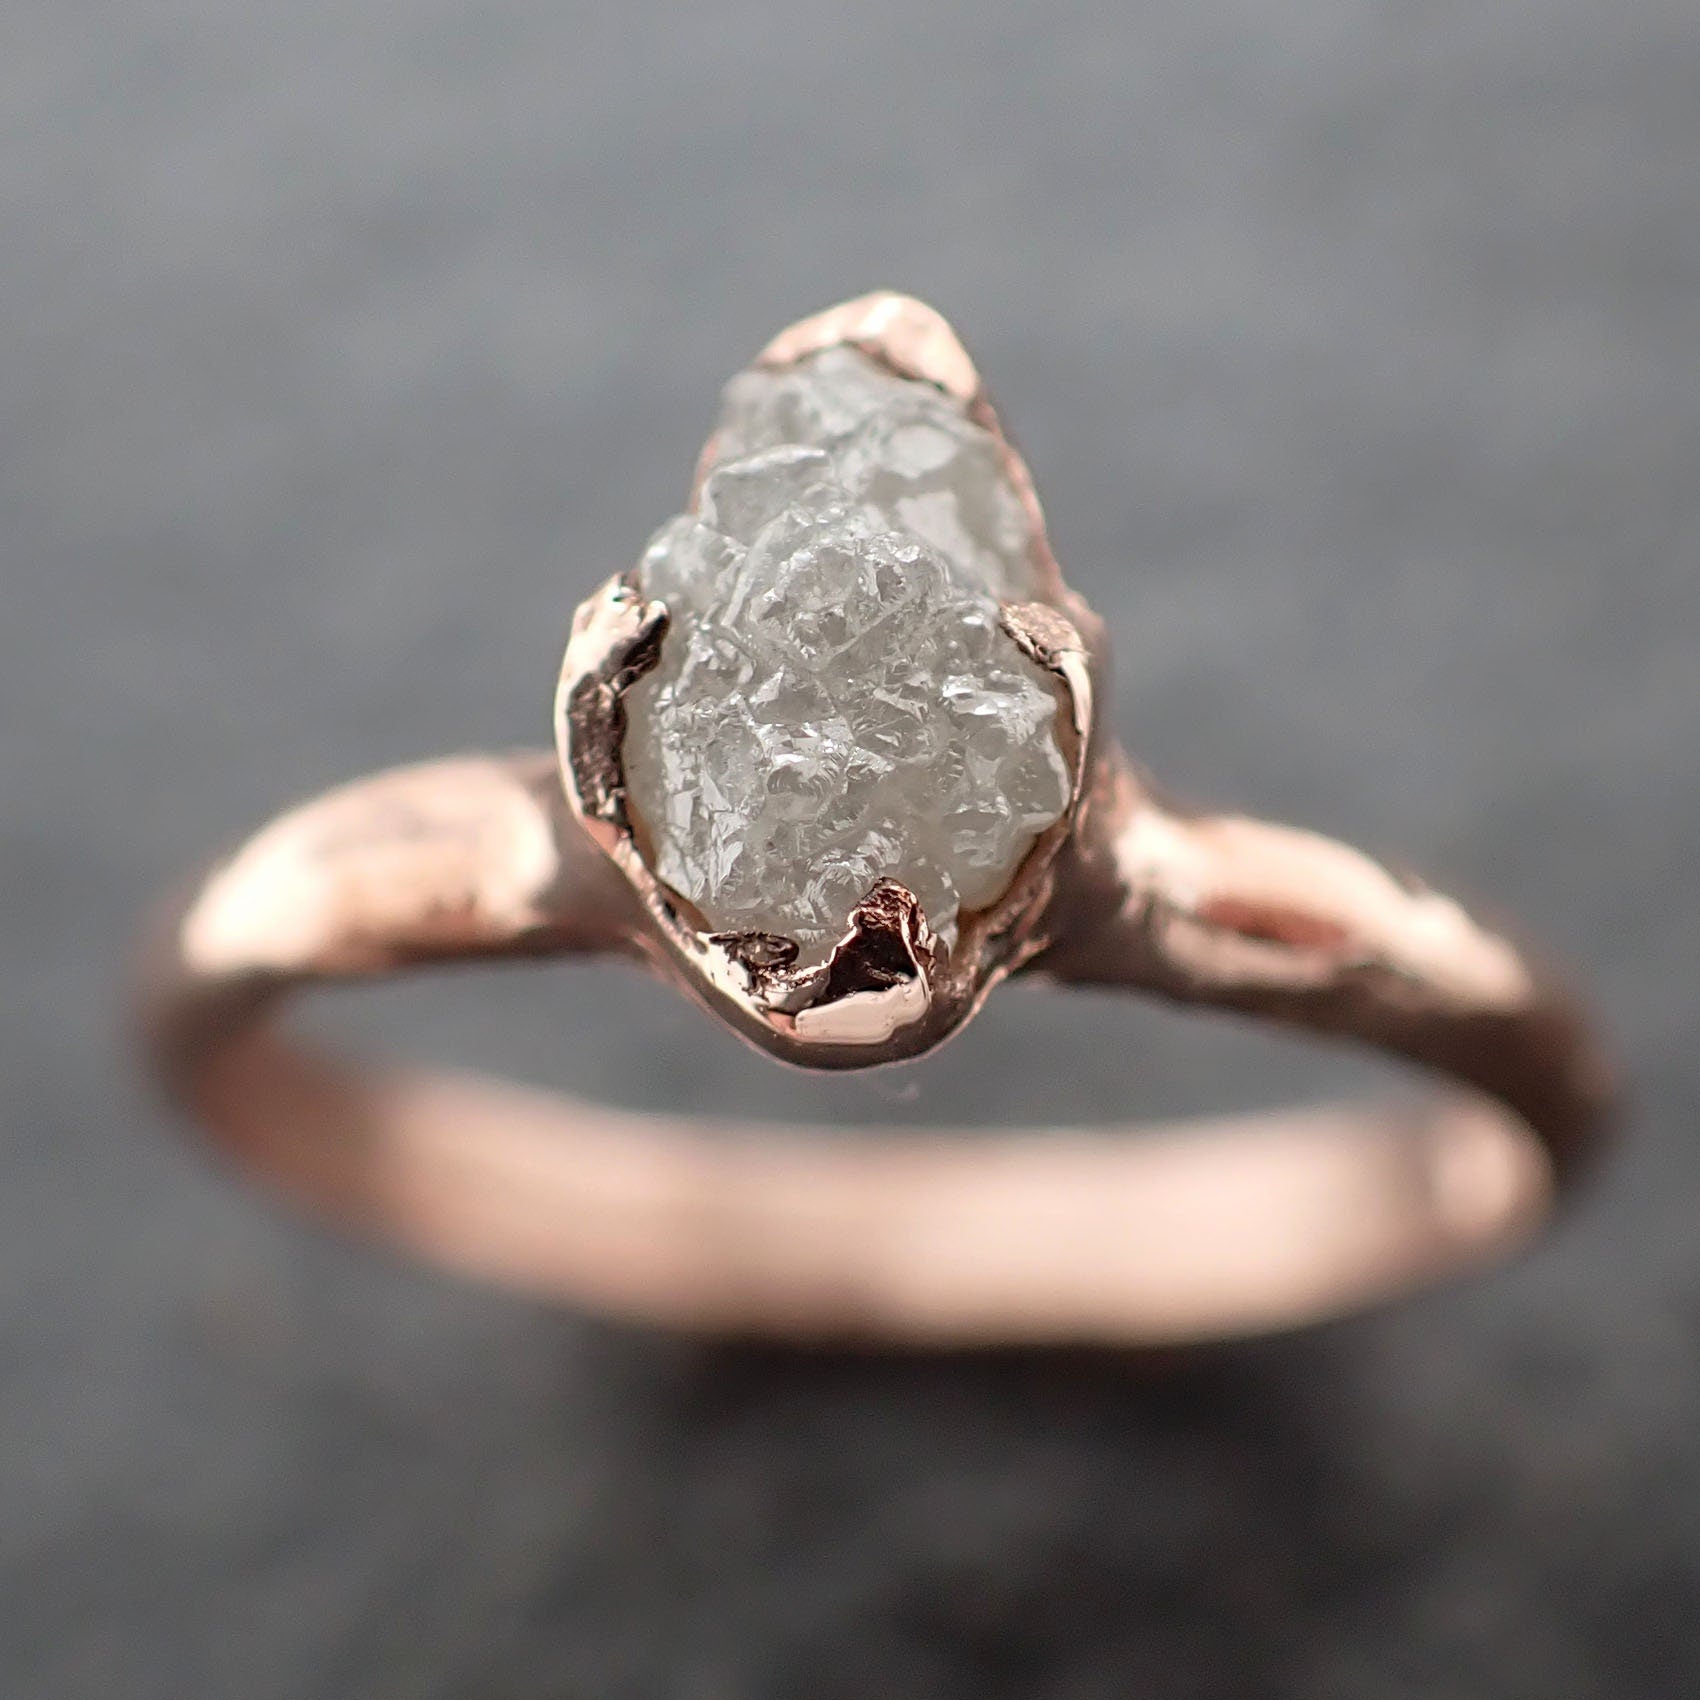 Raw Diamond Engagement Ring Rough Uncut Diamond Solitaire Recycled 14k Rose gold Conflict Free Diamond Wedding Promise 3113